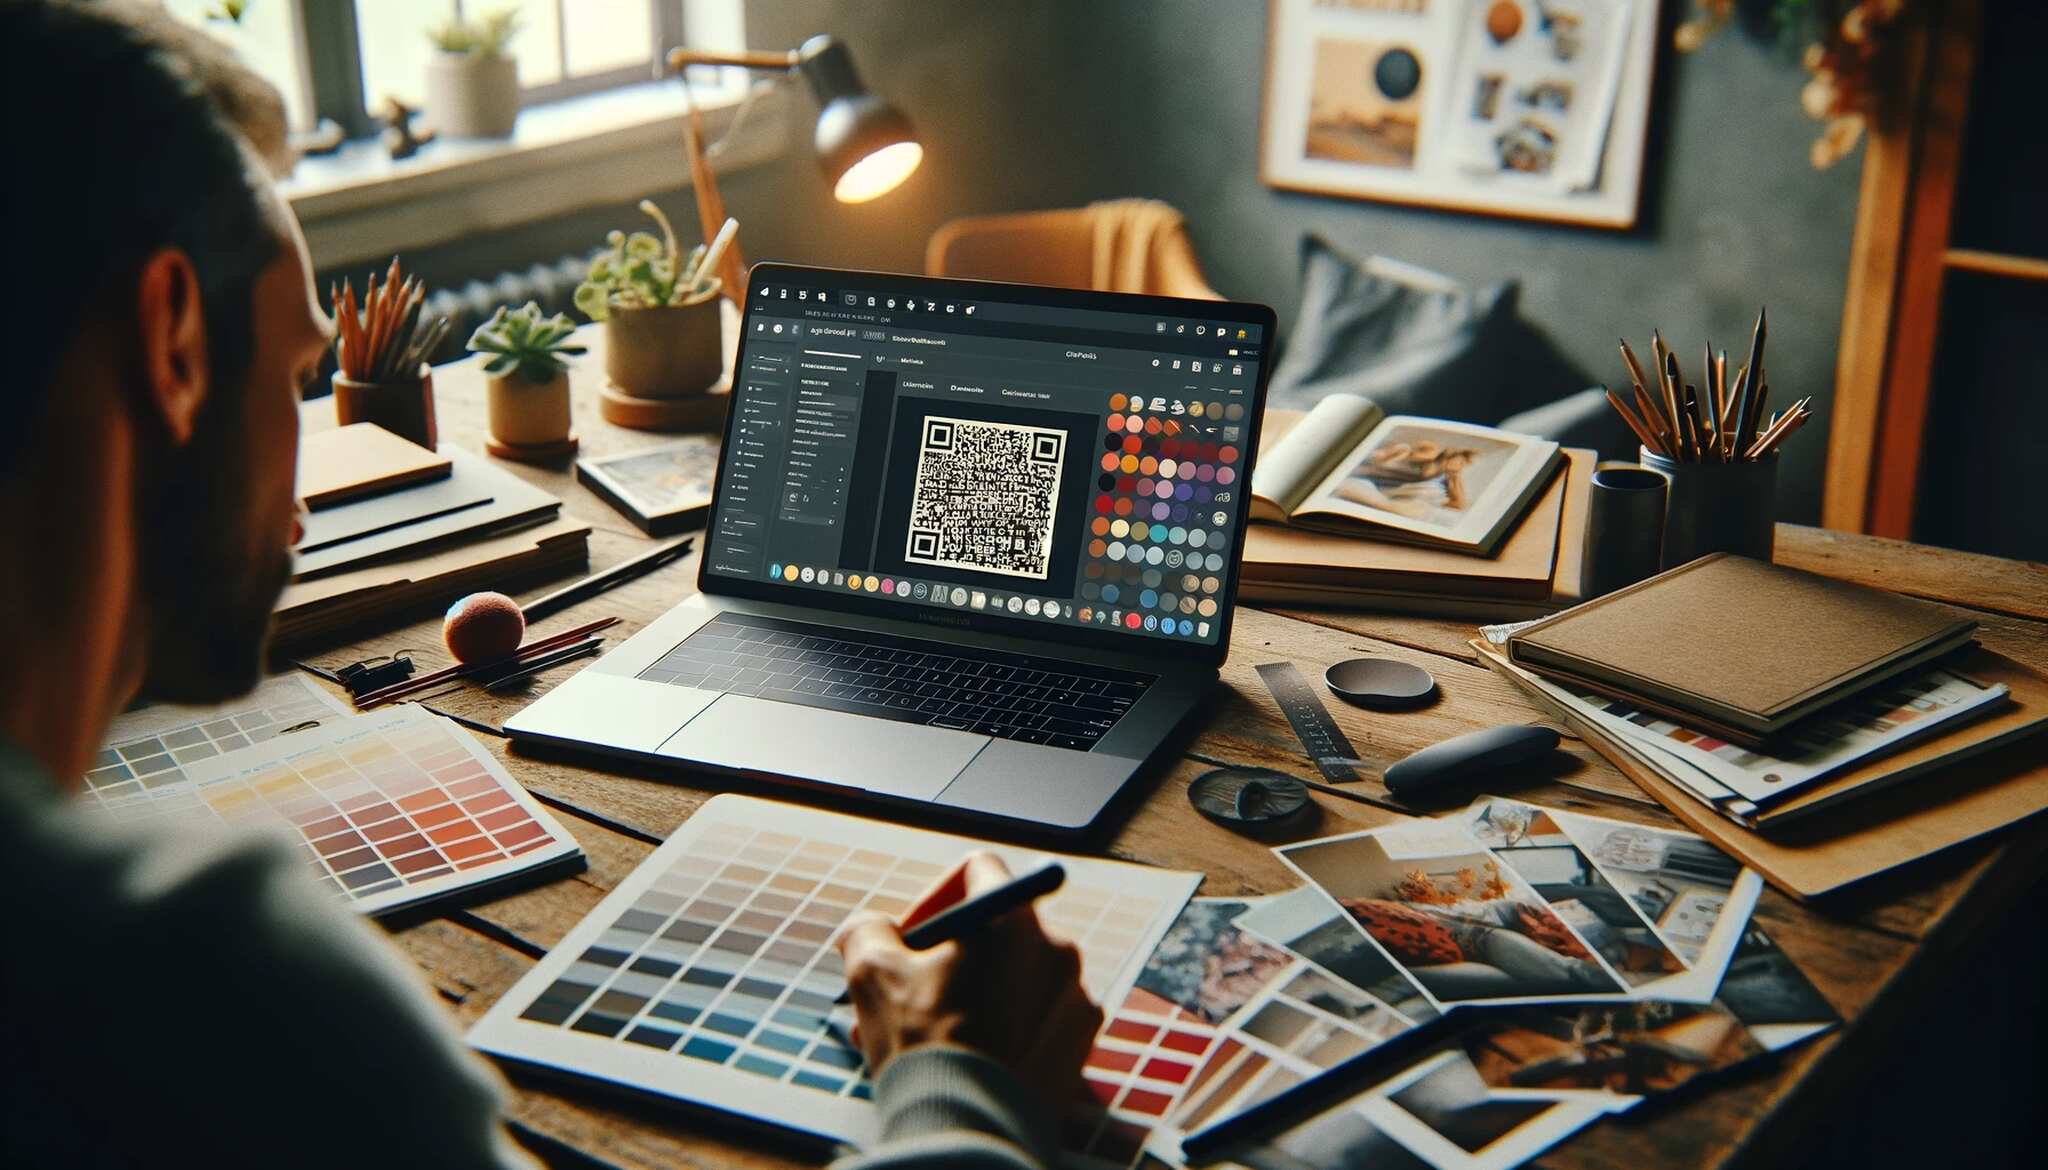 An over-the-shoulder view of a person using a laptop placed on a wooden desk, surrounded by design inspiration materials and QR code on laptop screen